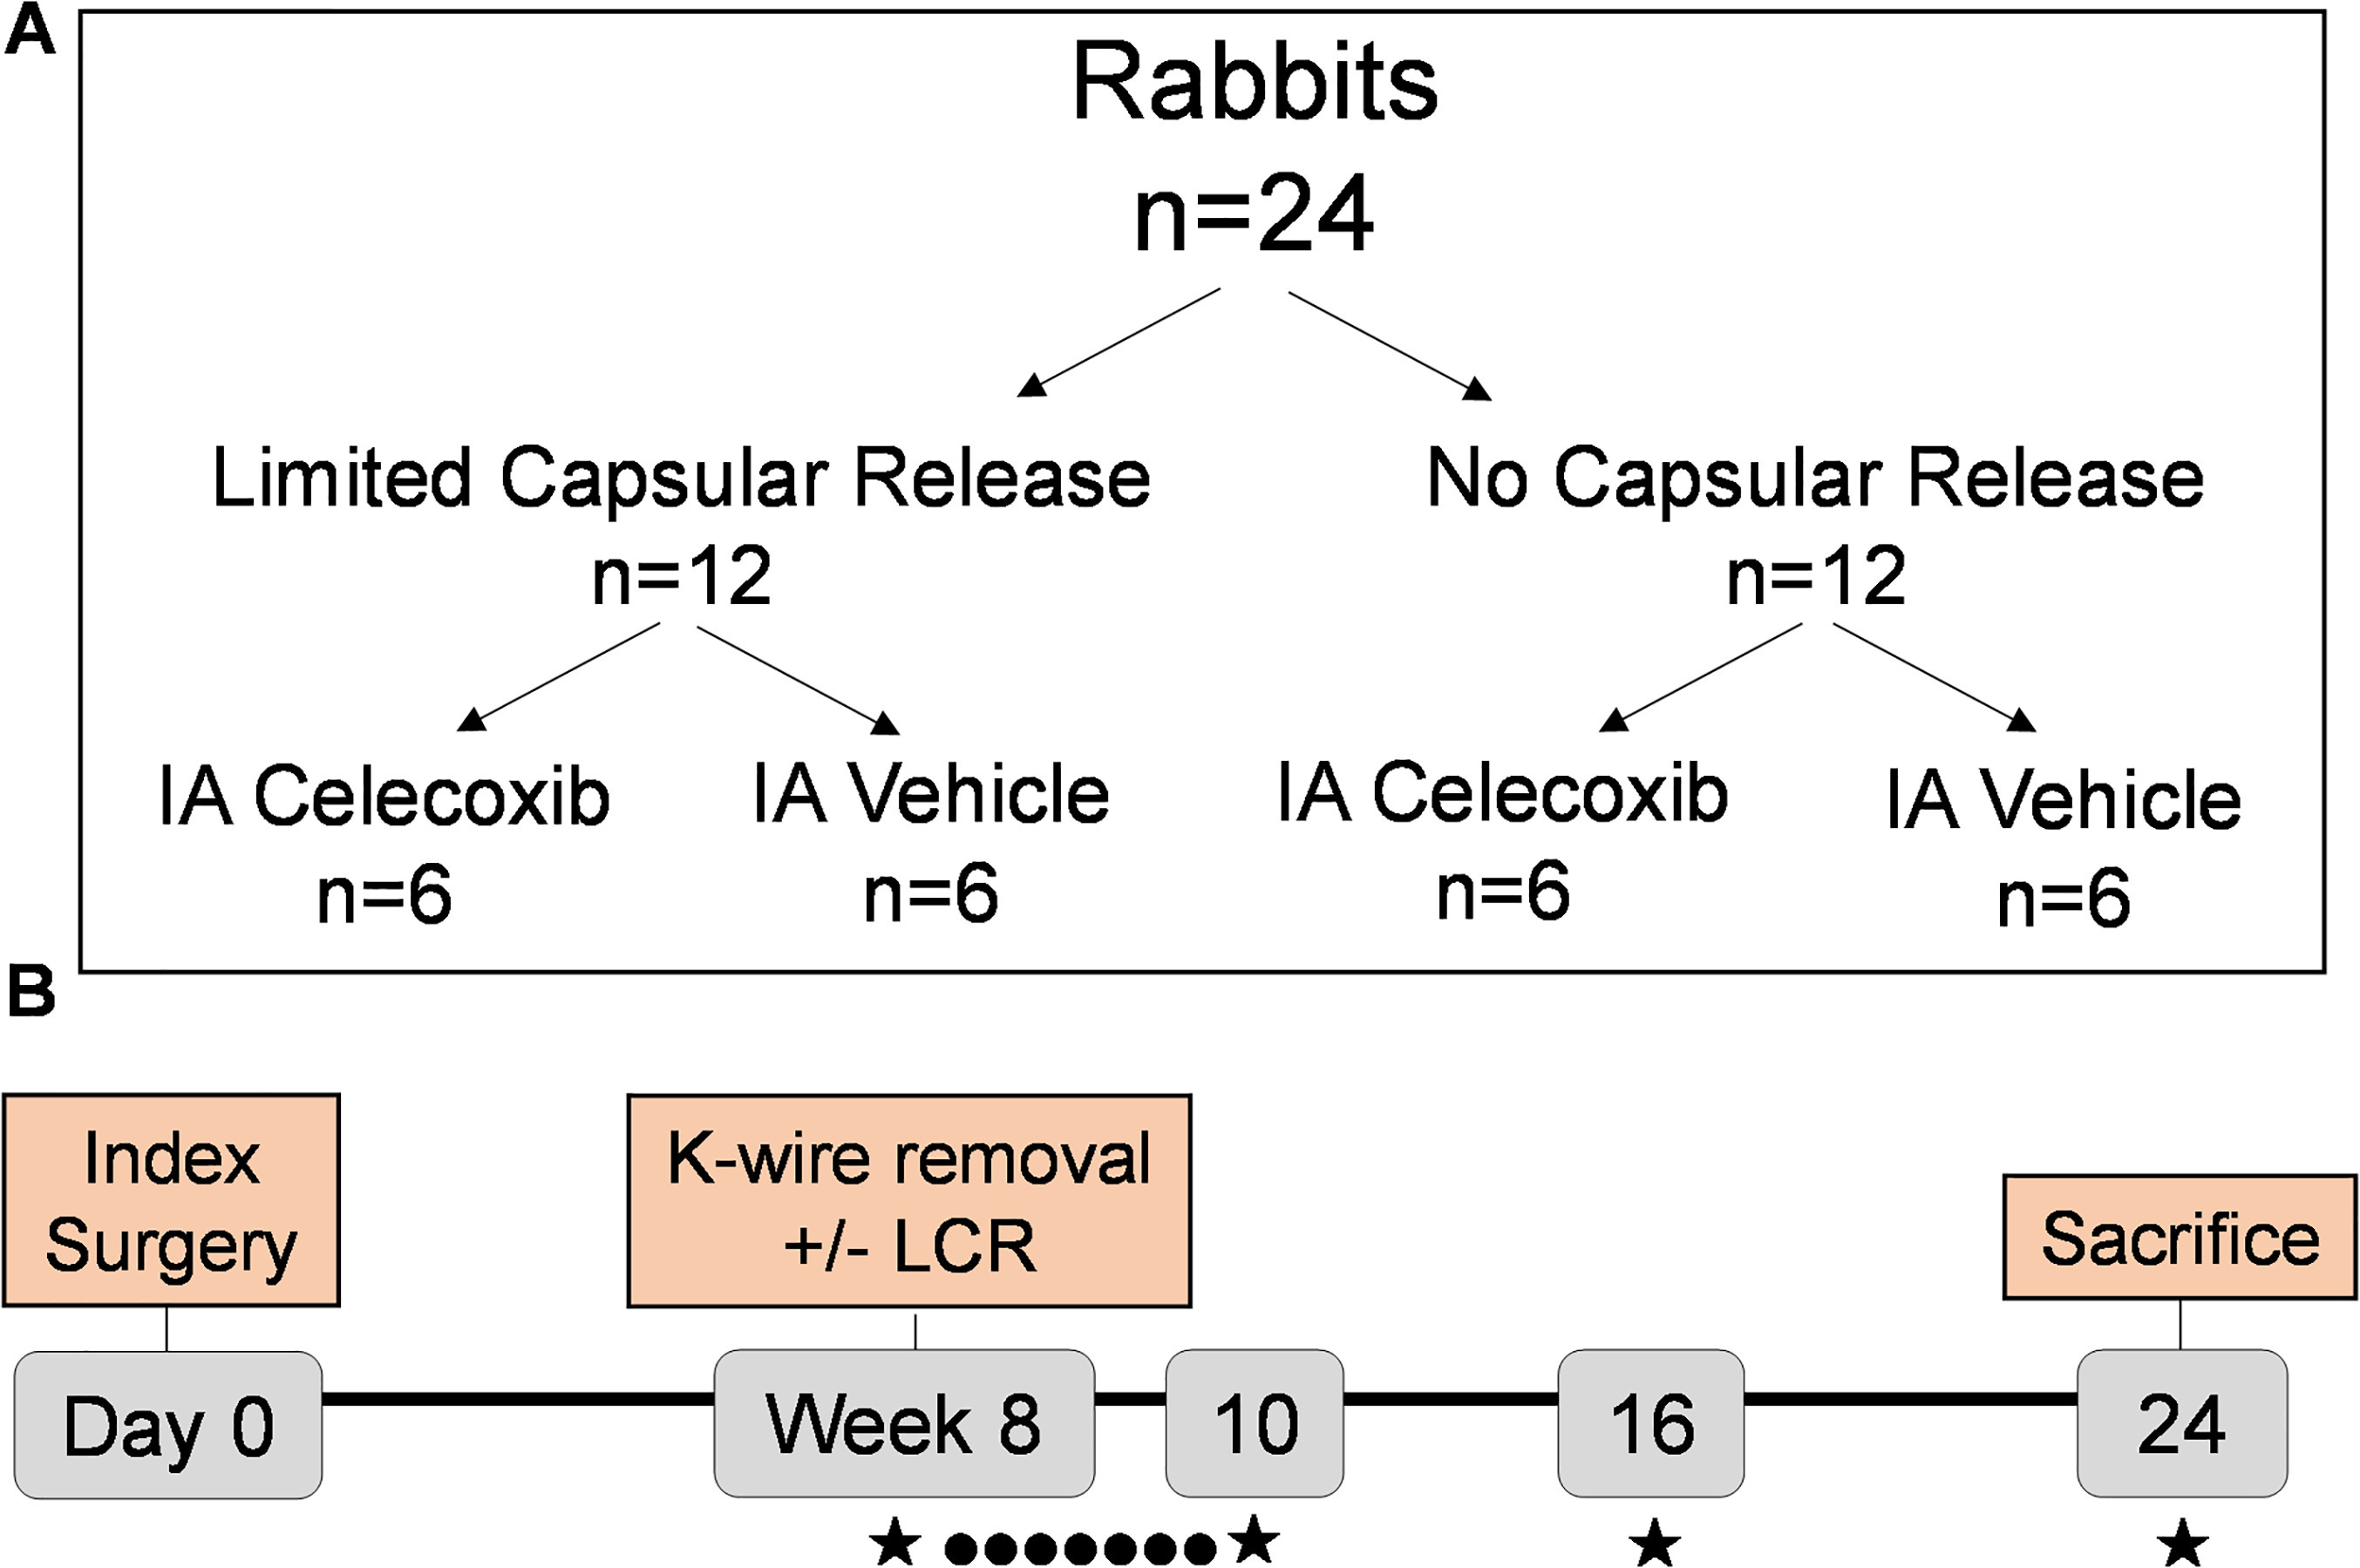 Fig. 1 
            Experimental design: a) 24 rabbits were divided into four groups in order to test effects of limited capsular release (LCR) and intra-articular (IA) celecoxib, both separately and together. b) Over the course of the experiment, contractures were treated every day for two weeks with IA injections of celecoxib or vehicle (●) and assessed (★) at weeks 8, 10, 16, and 24 for passive extension angle. After sacrifice (24 weeks), capsular stiffness was evaluated. K-wire, Kirschner wire.
          